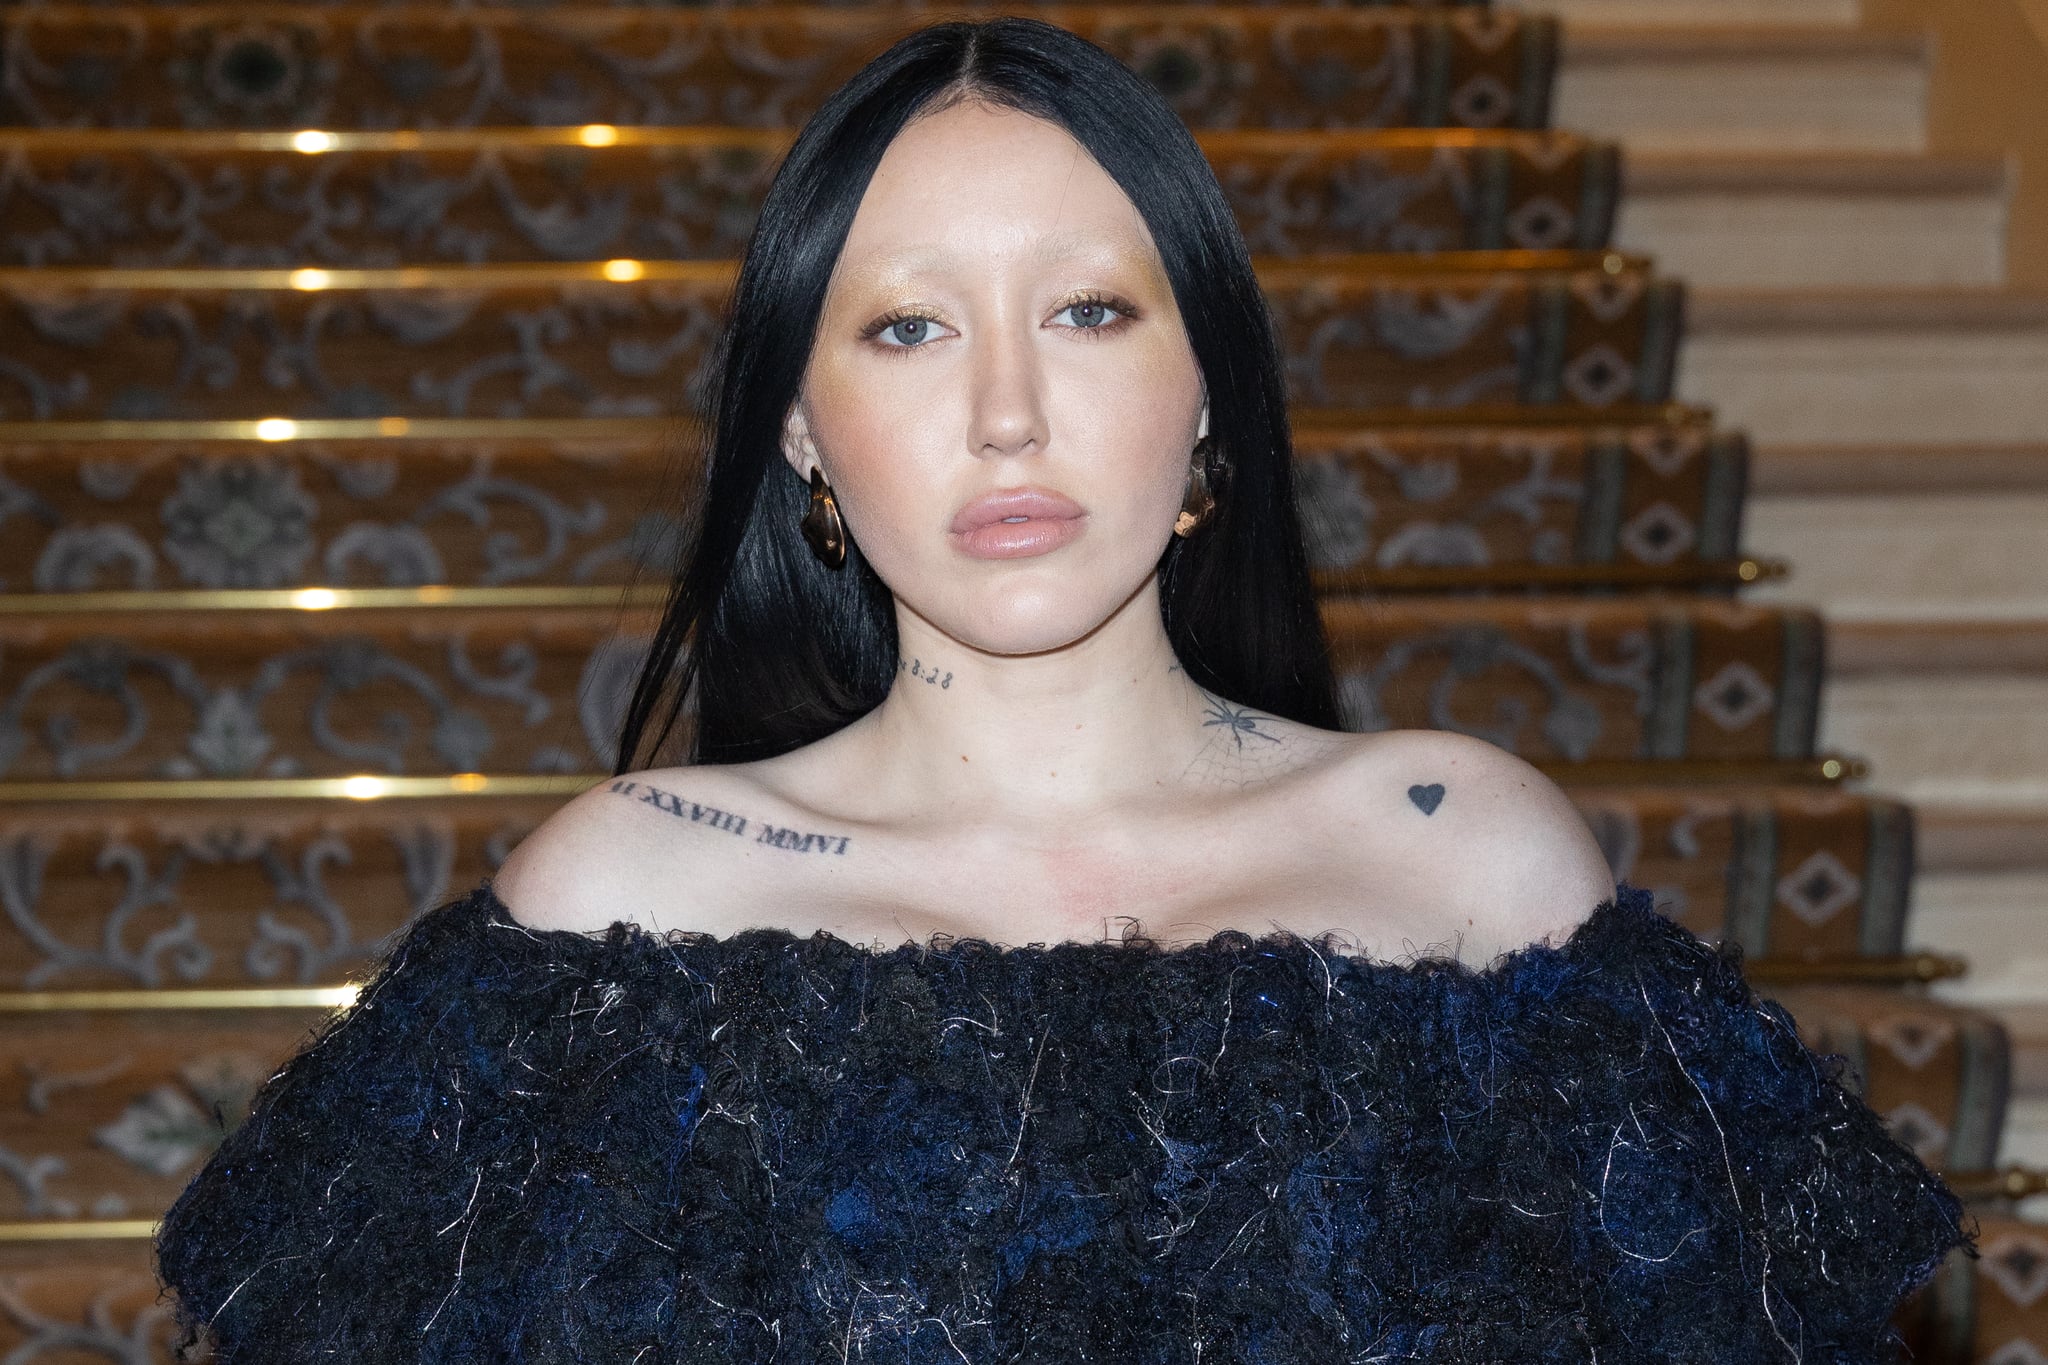 PARIS, FRANCE - JANUARY 25: (EDITORIAL USE ONLY - For Non-Editorial use please seek approval from Fashion House) Noah Cyrus attends the Viktor & Rolf Haute Couture Spring Summer 2023 show as part of Paris Fashion Week  on January 25, 2023 in Paris, France. (Photo by Marc Piasecki/WireImage)